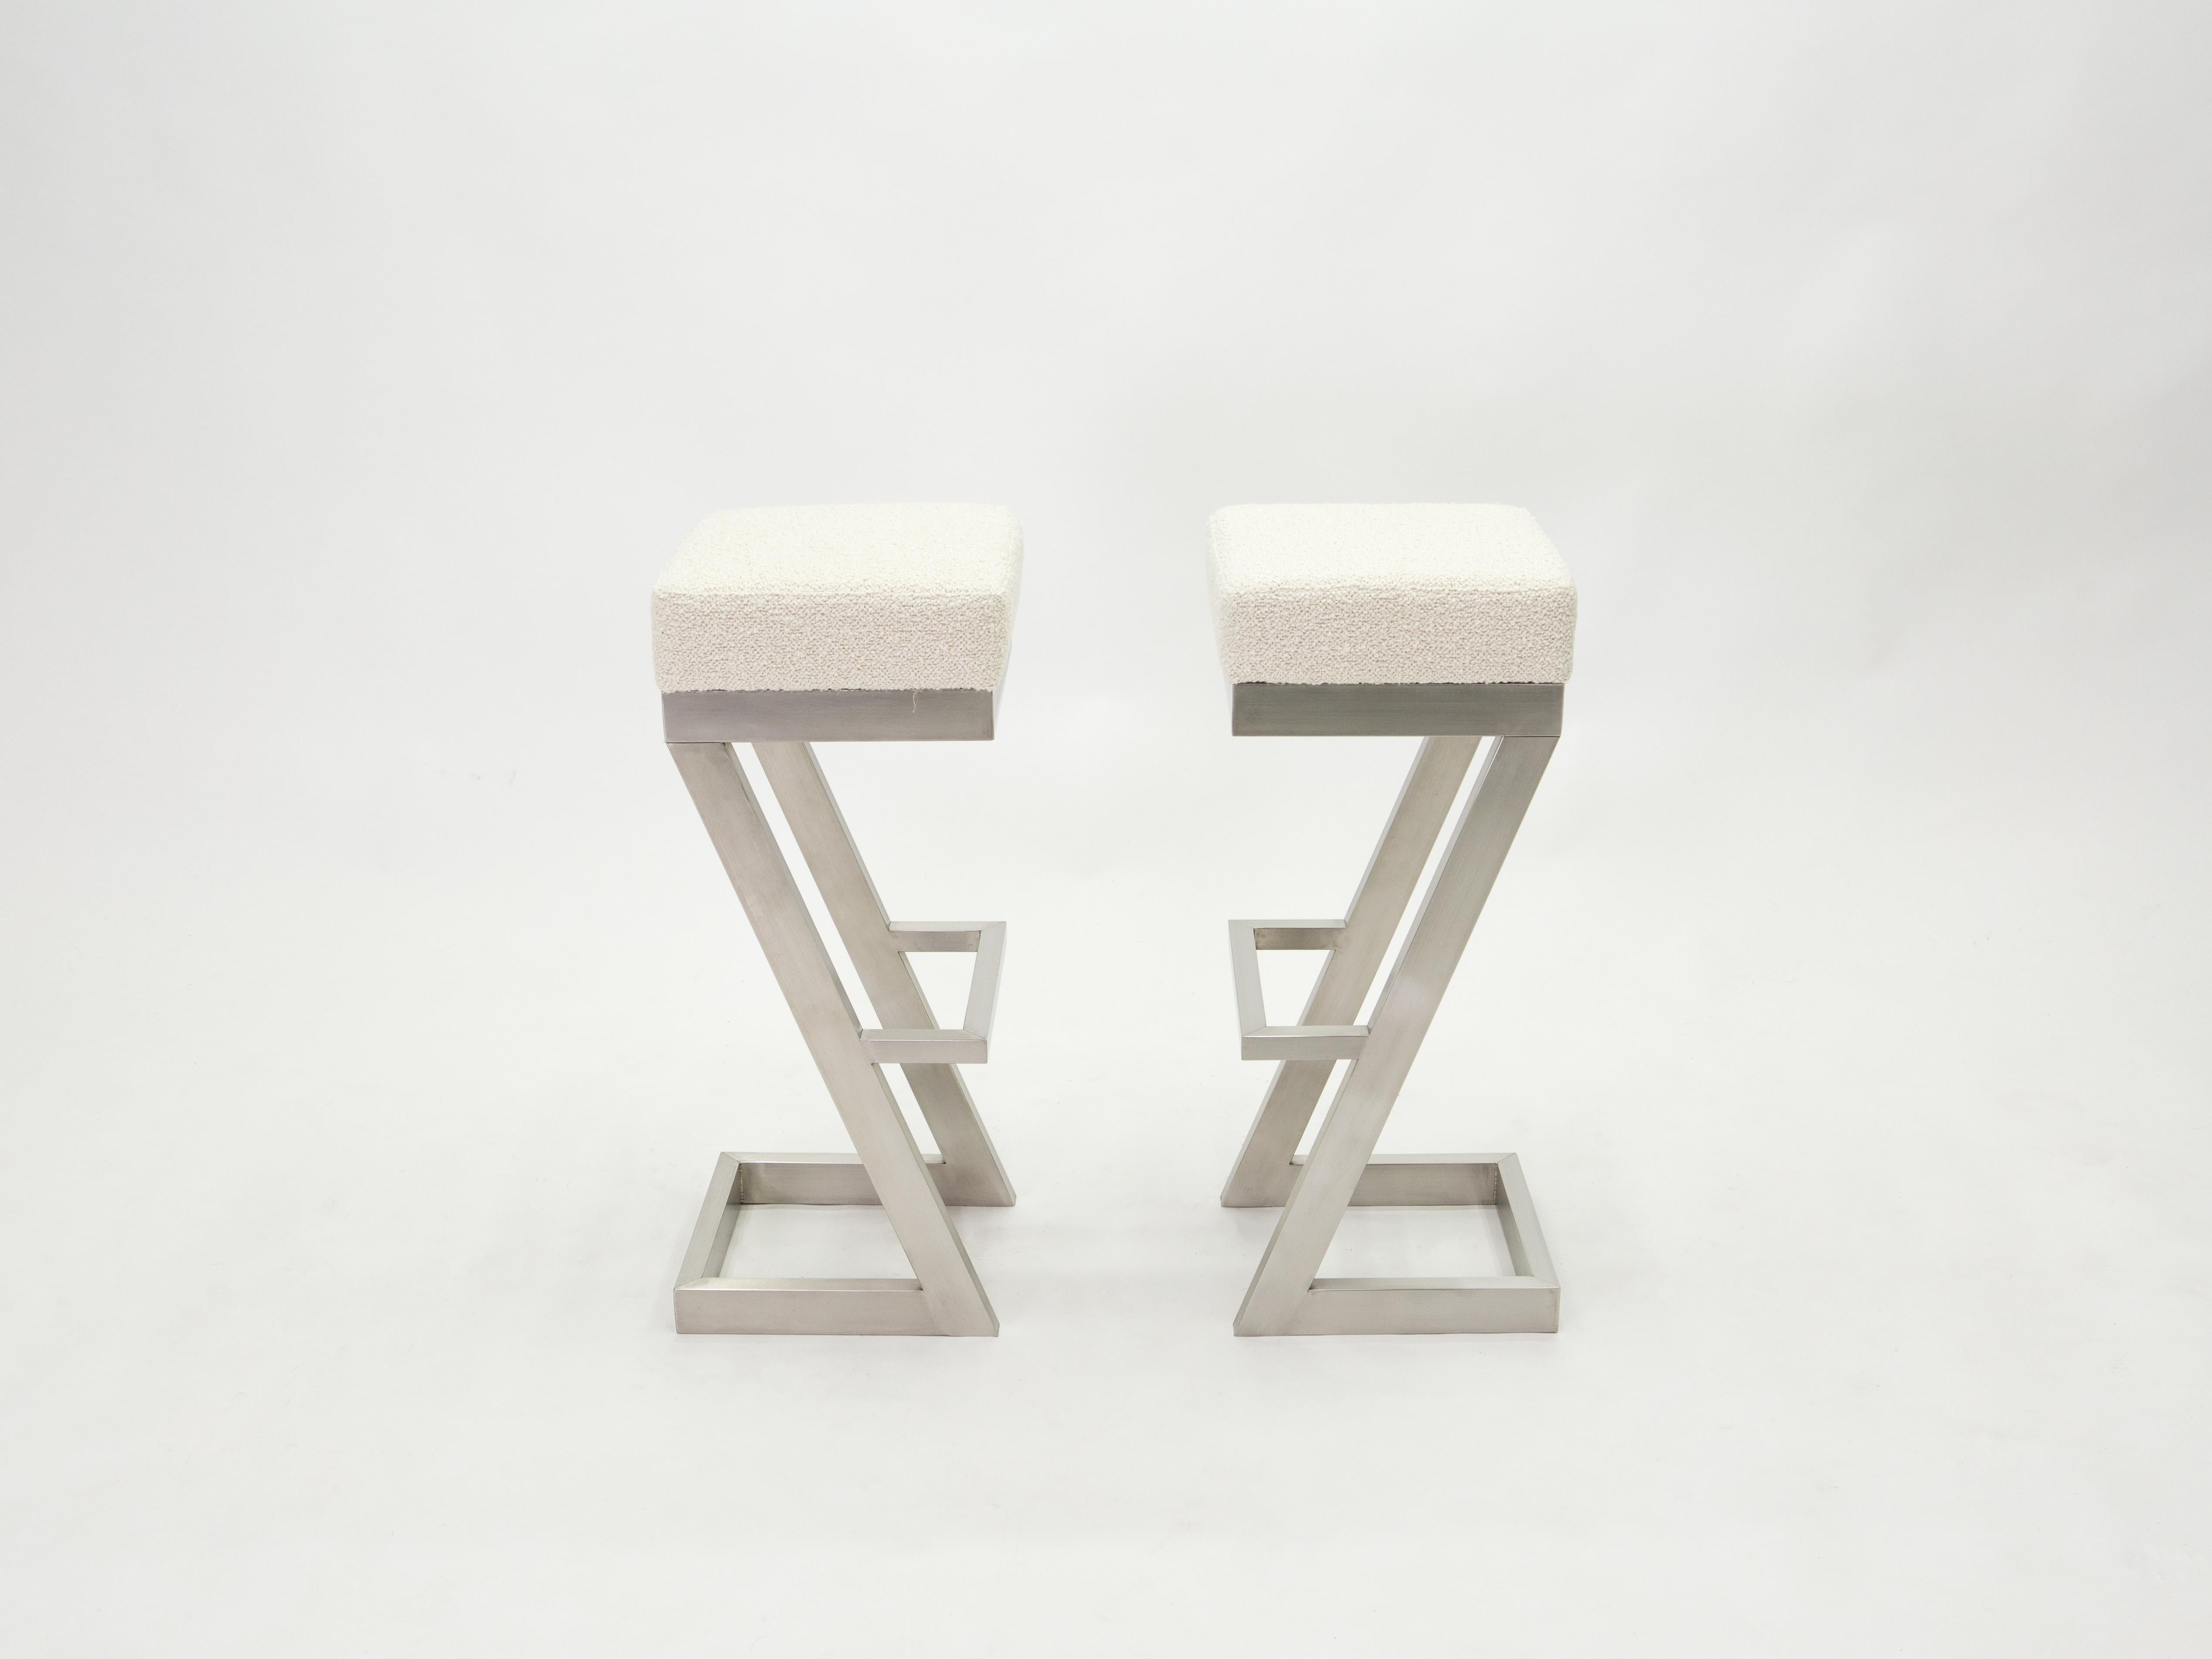 Strong architectural lines point to these beautiful bar stools French mid-century roots. Designed in the seventies, it features a sharped brushed steel structure, newly upholstered with a soft wool bouclé fabric by Lelièvre. It looks minimal and